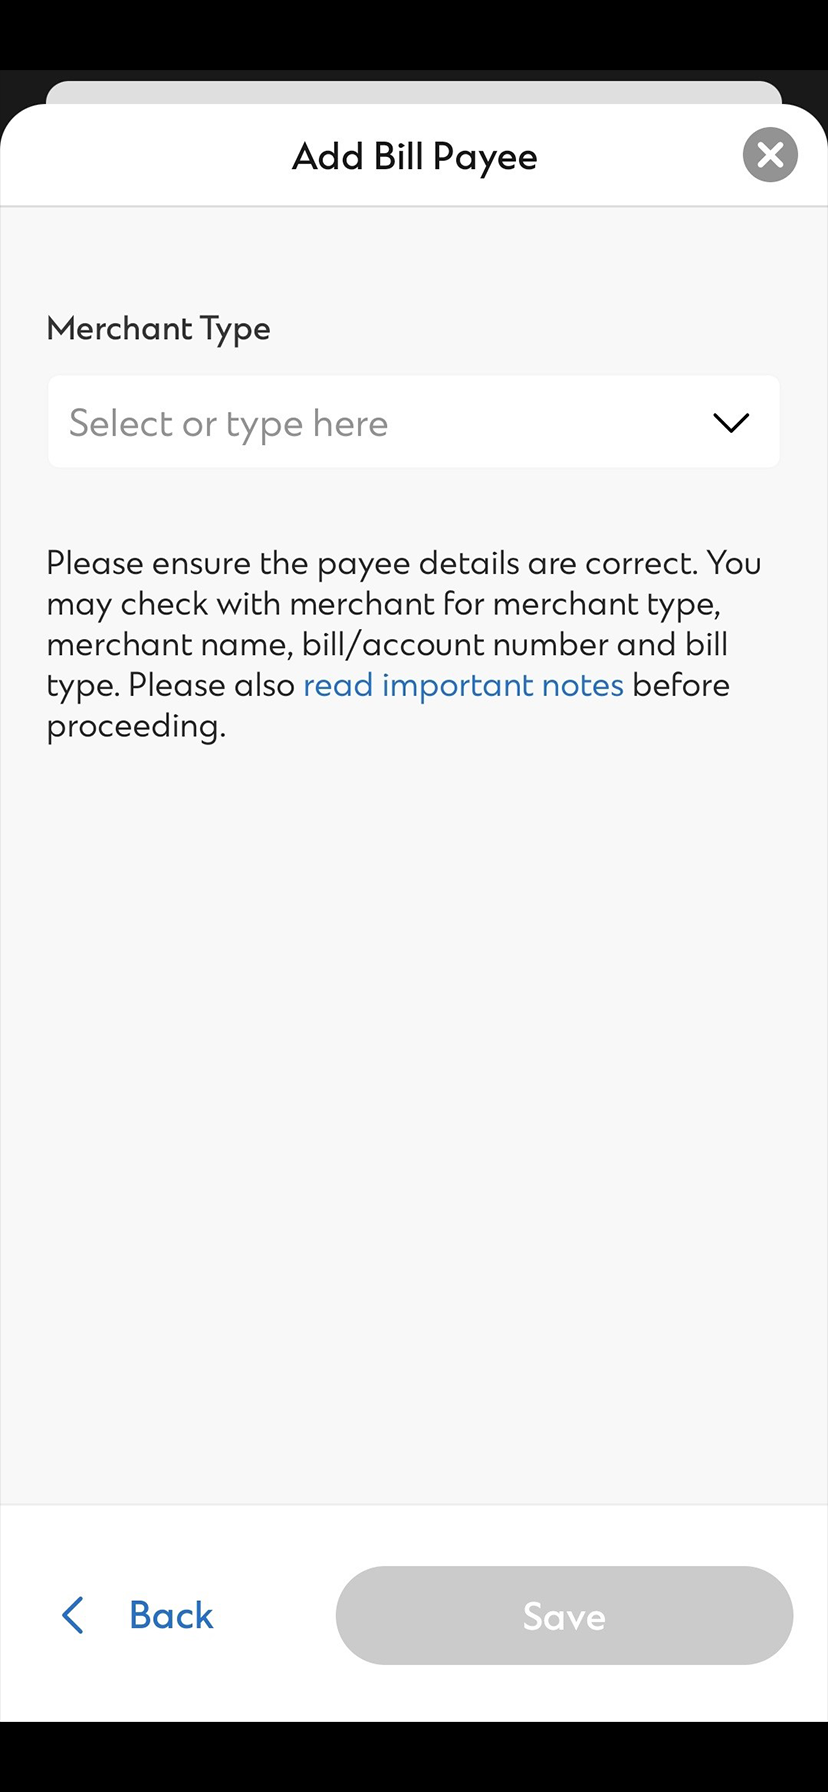 How to add bill payee via SC Mobile Step 2